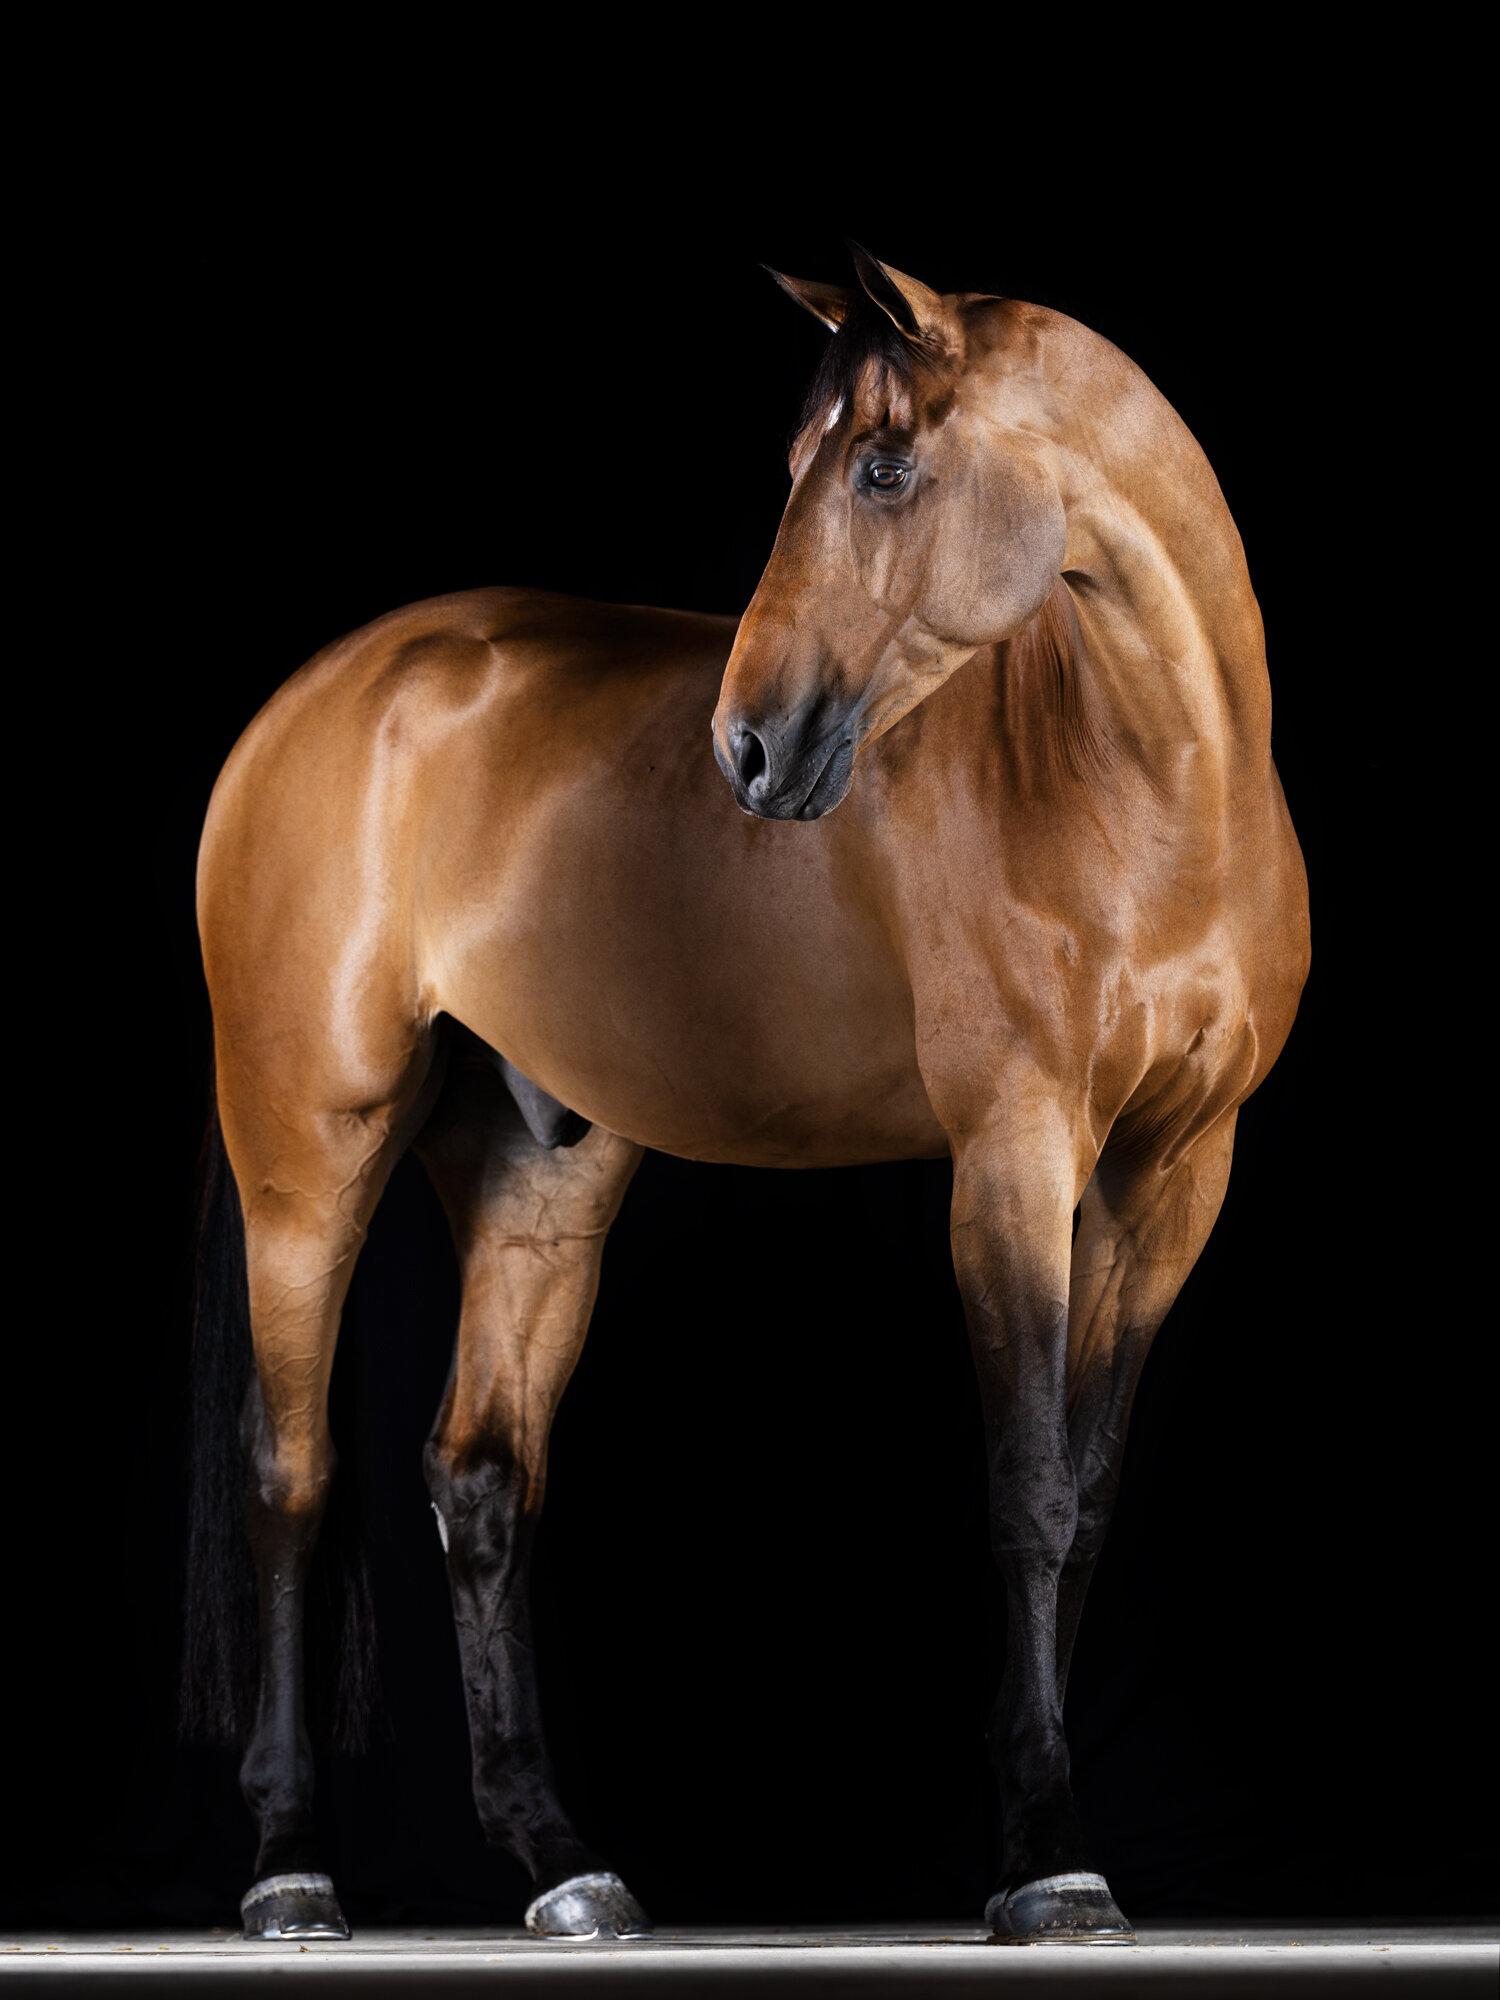 Archival Pigment Print Under Acrylic Glass
Edition of 15
All available sizes and editions:
 53" x 40", Edition of 15
 63" x 48", Edition of 15 
 73" x 55", Edition of 15
 80" x 60", Edition of 10 
 92" x 71", Edition of 10

"Horses stir passion,